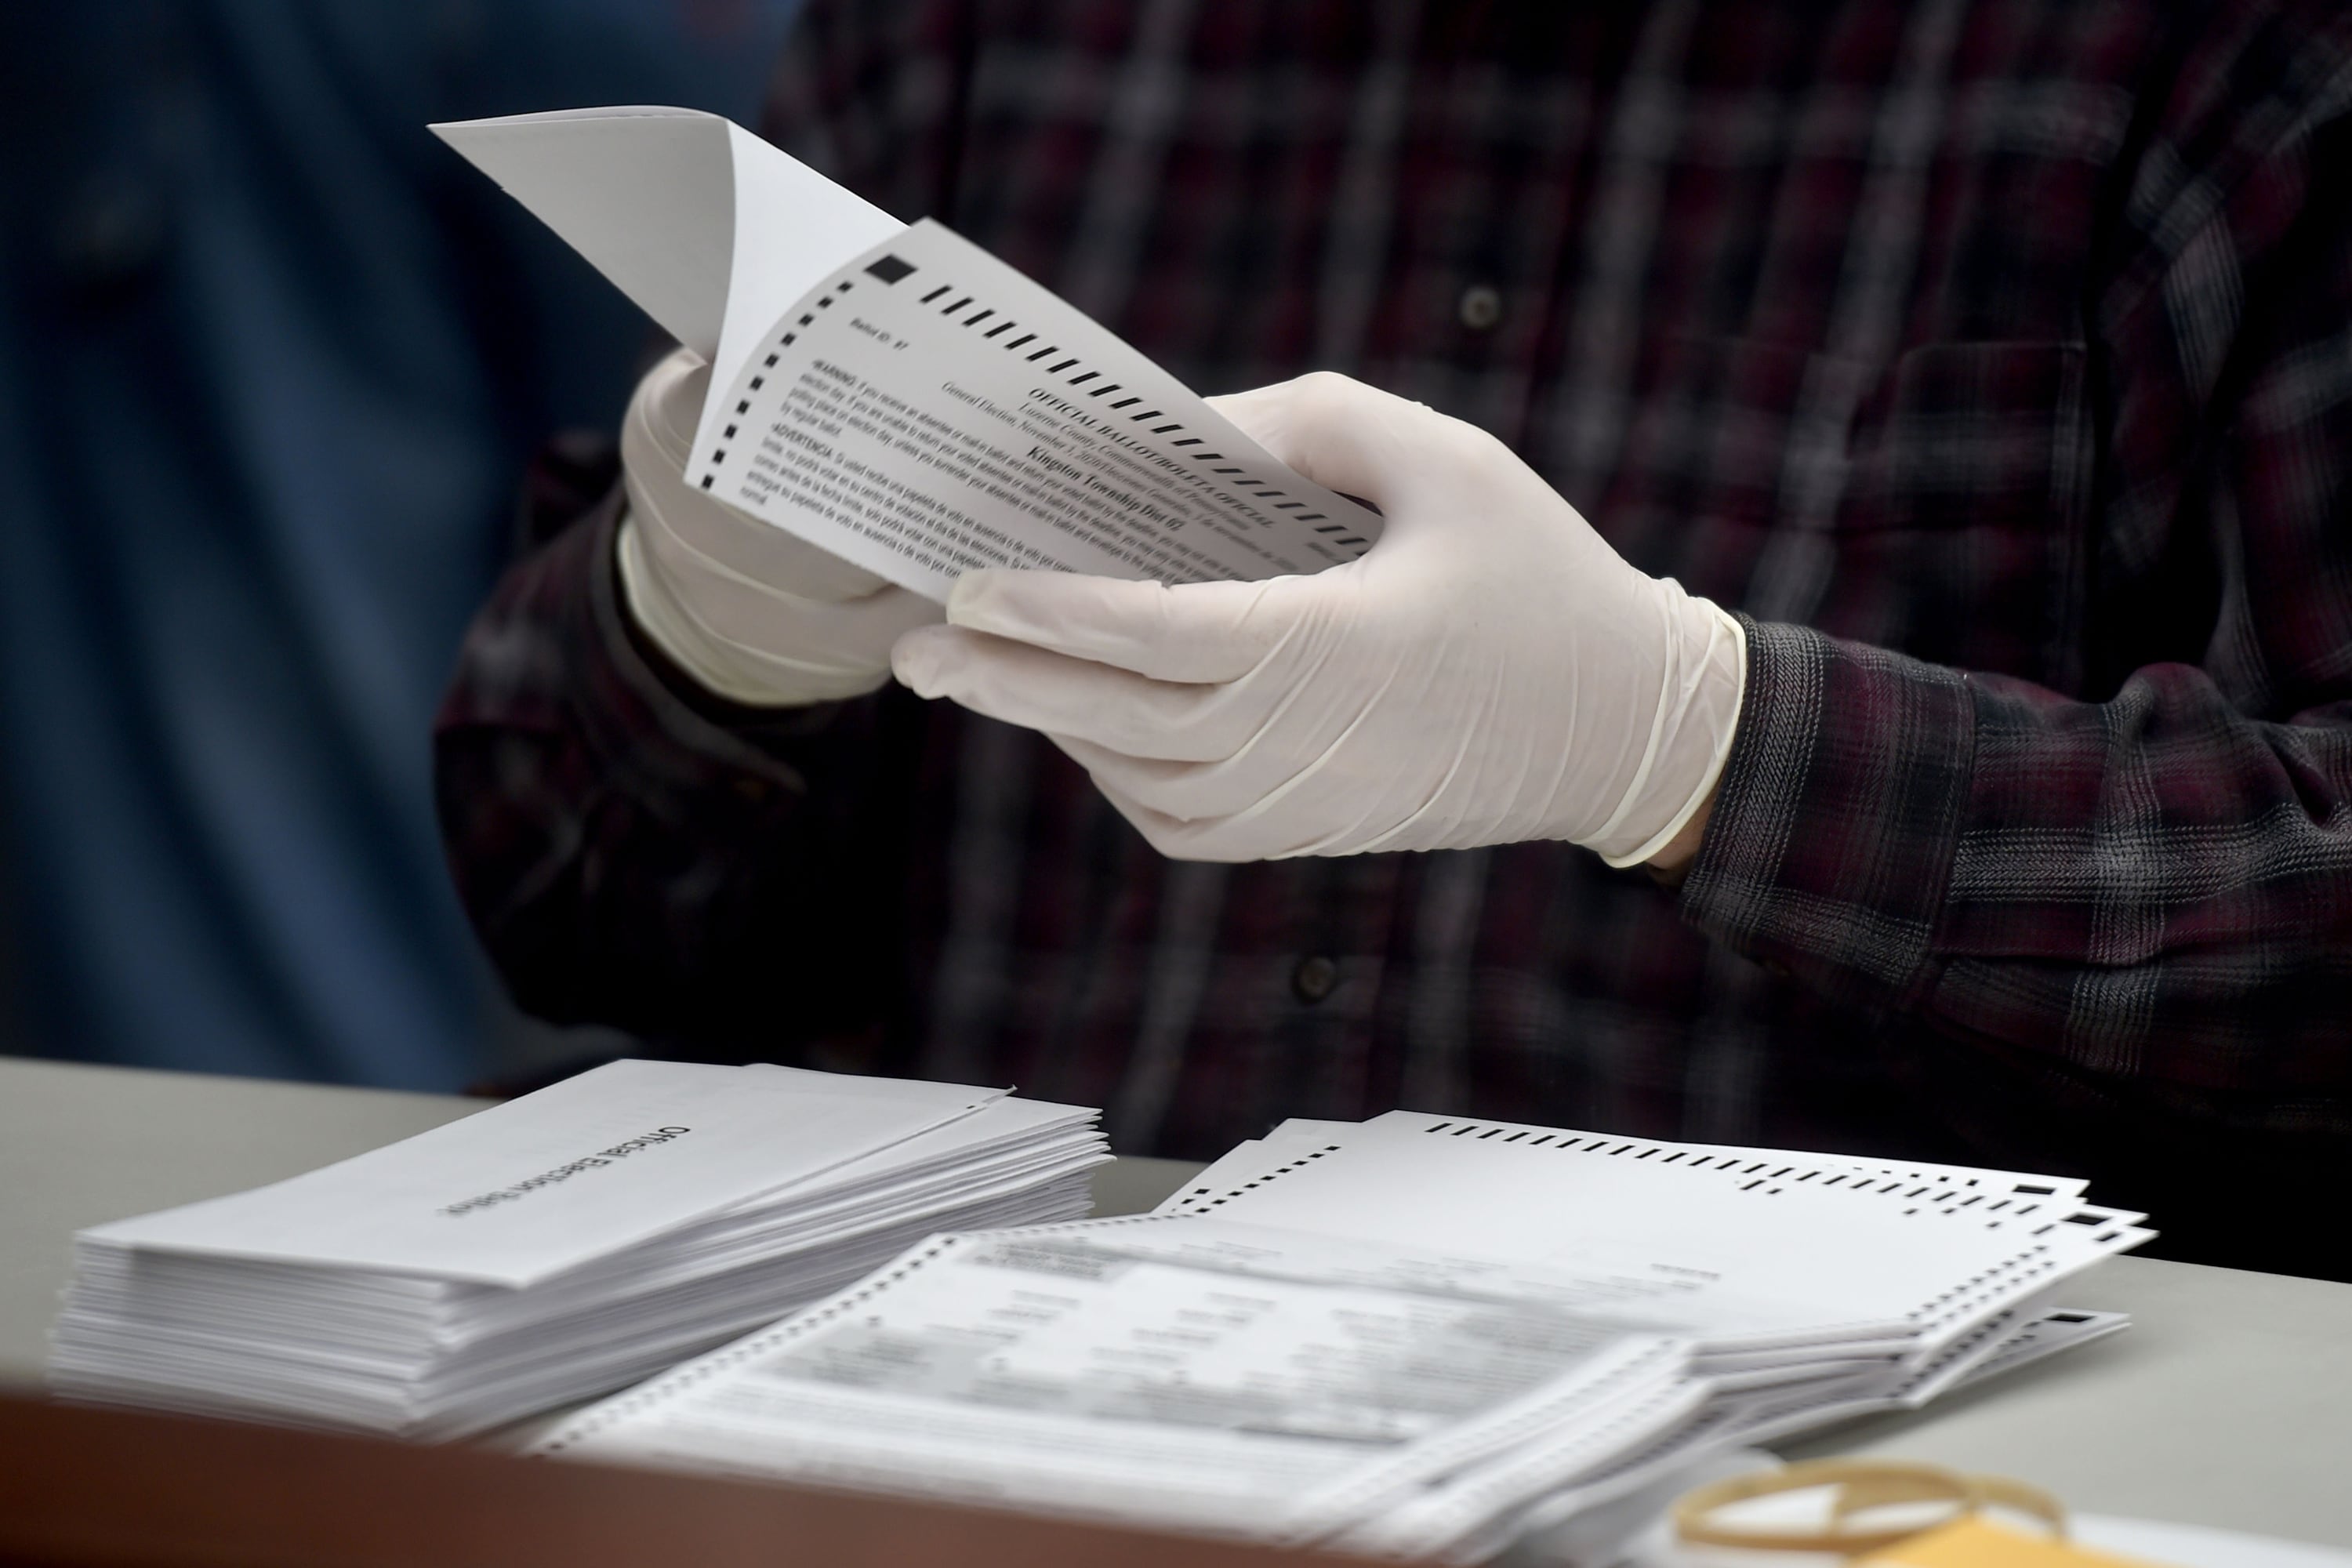 County employee's hands open mail-in ballots while wearing gloves.